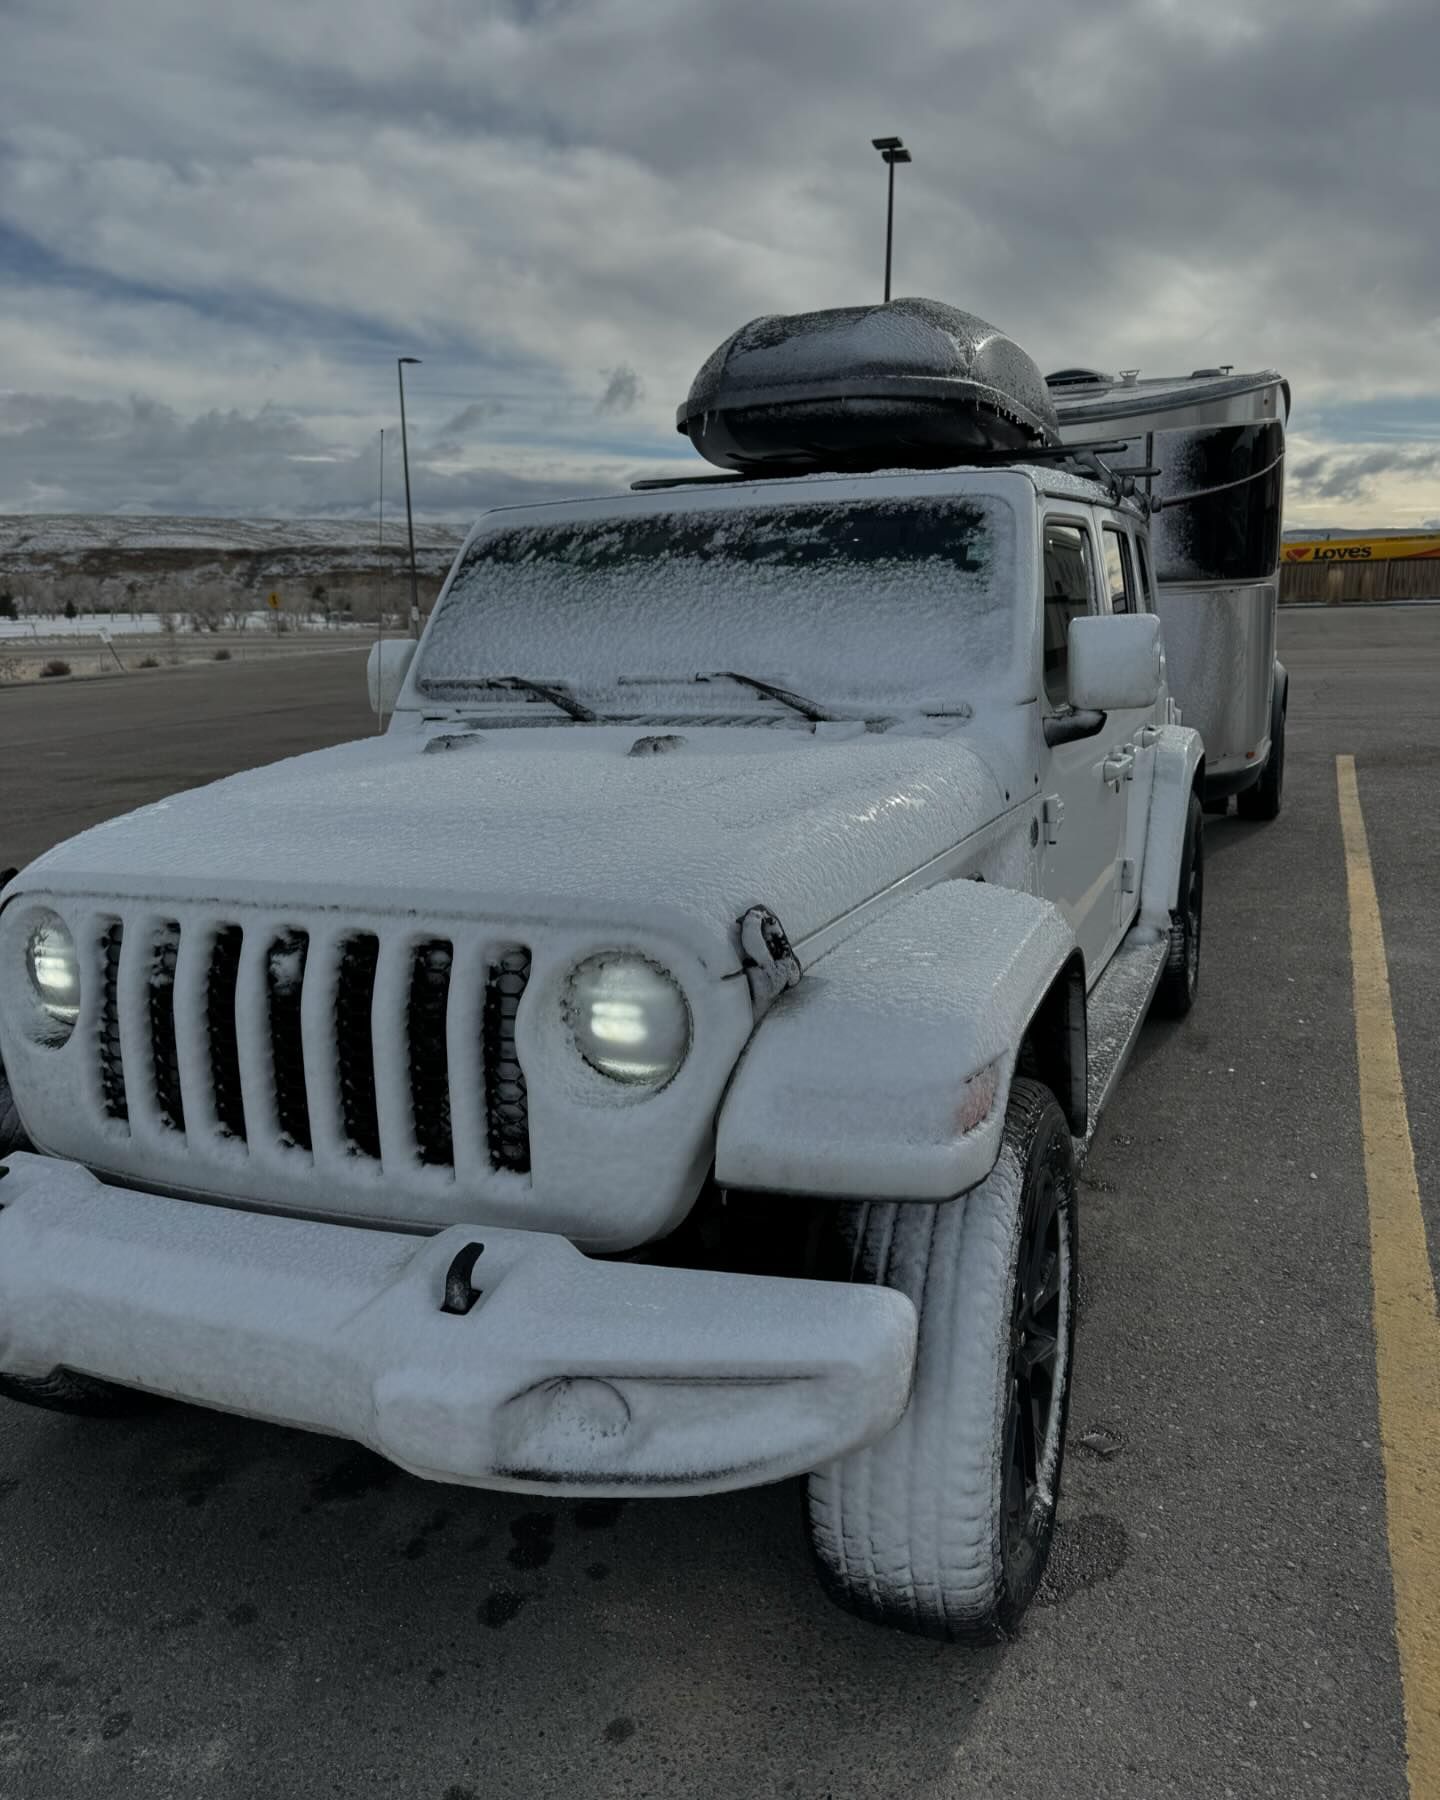 ice ice baby 🧊❄️ had to buy a snow scraper after this lol. Jeep windshields are the most delicate substance known to man, so it took me about an hour and a half to slowly thaw it that morning… i’ve already replaced my windshield four times and wasn’t about to make it a fifth from cracking it with temp change 😅